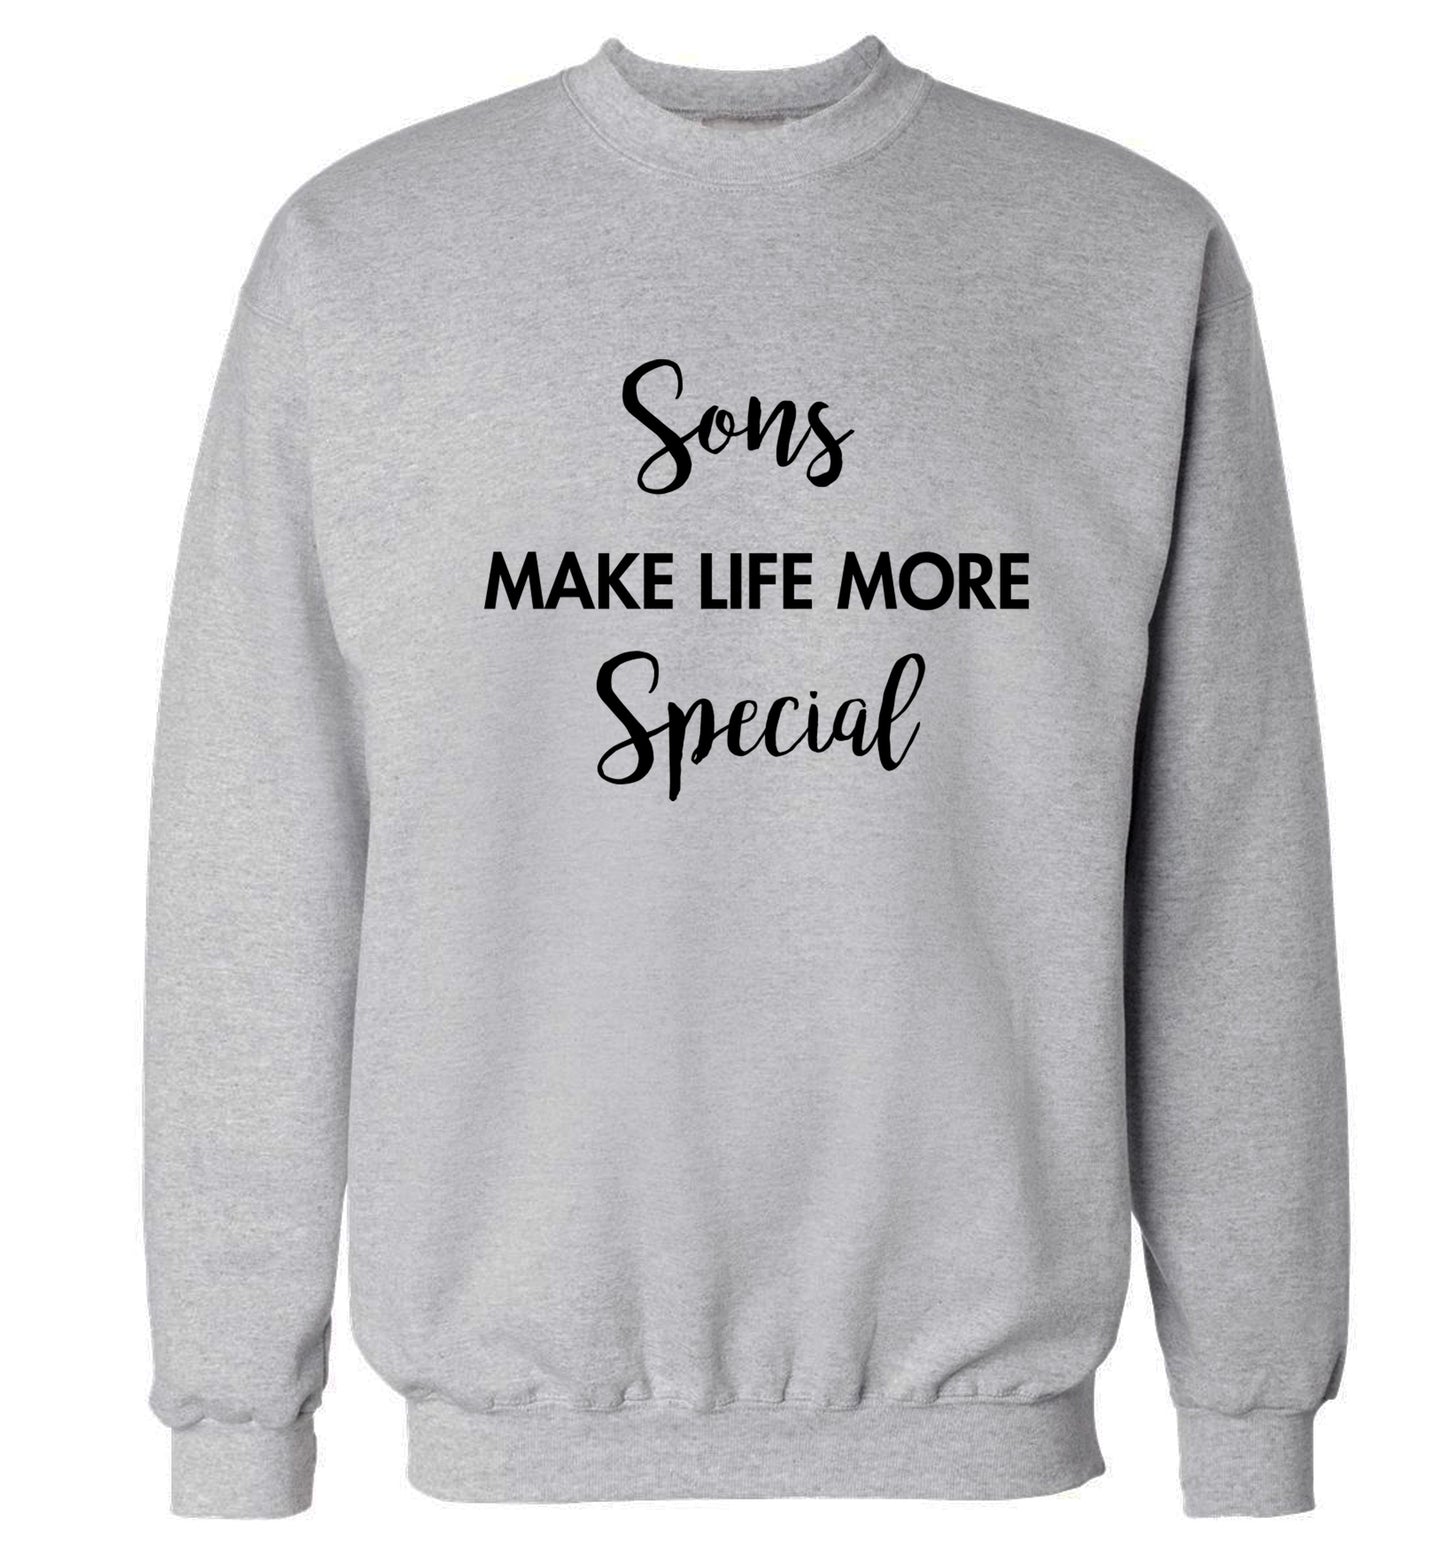 Sons make life more special Adult's unisex grey Sweater 2XL